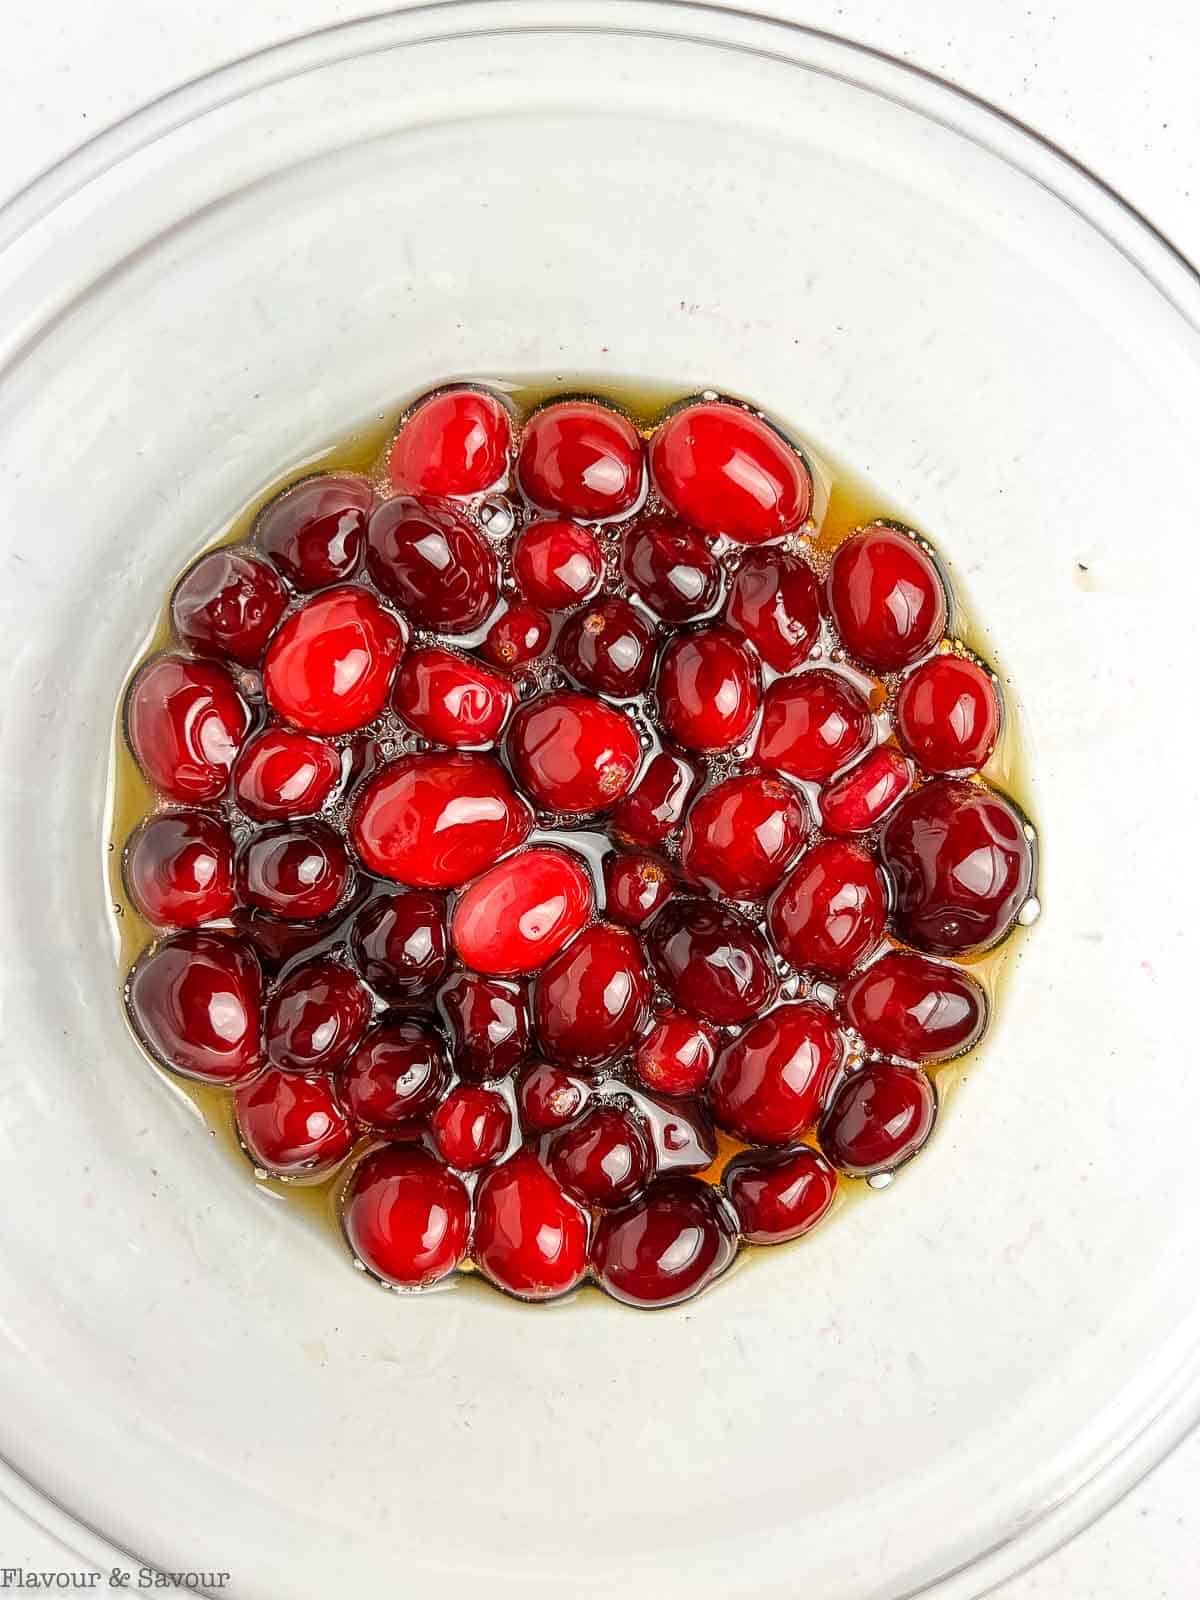 Sugared cranberries soaking in maple syrup in a glass bowl.